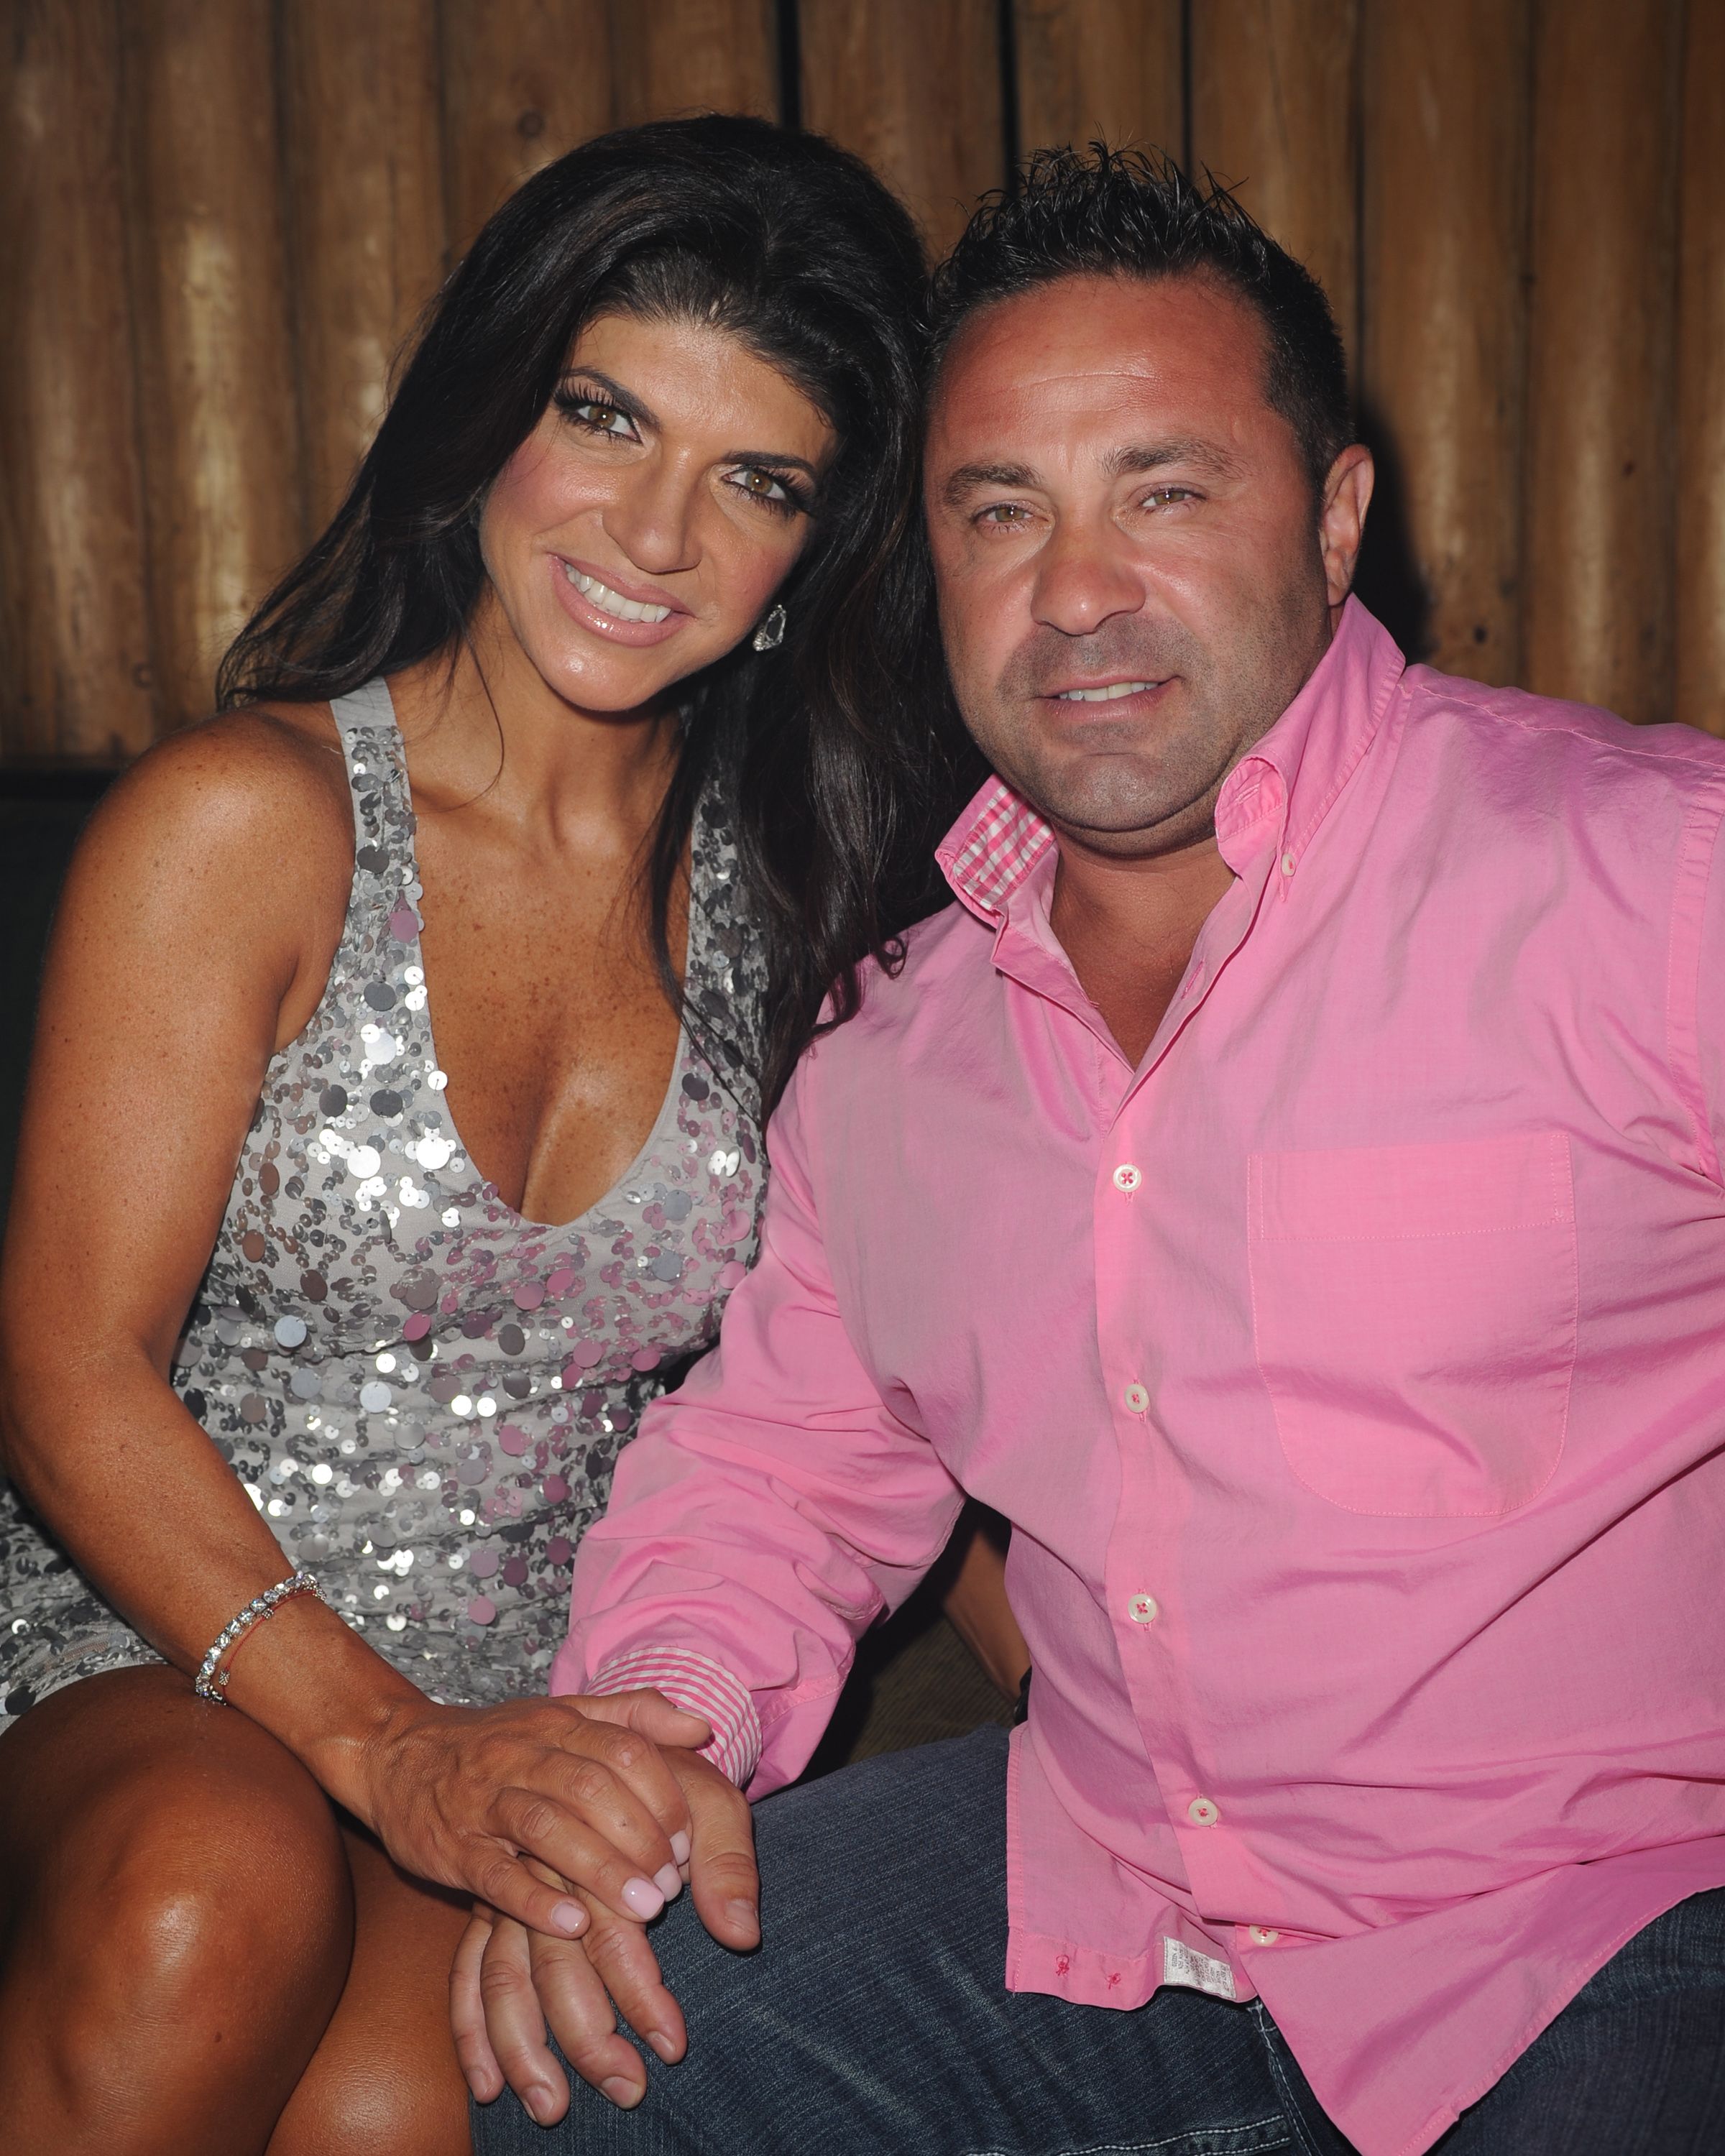 UPDATEDReal Housewives of New Jersey Star Joe Giudice Deportation Appeal Denied hq pic